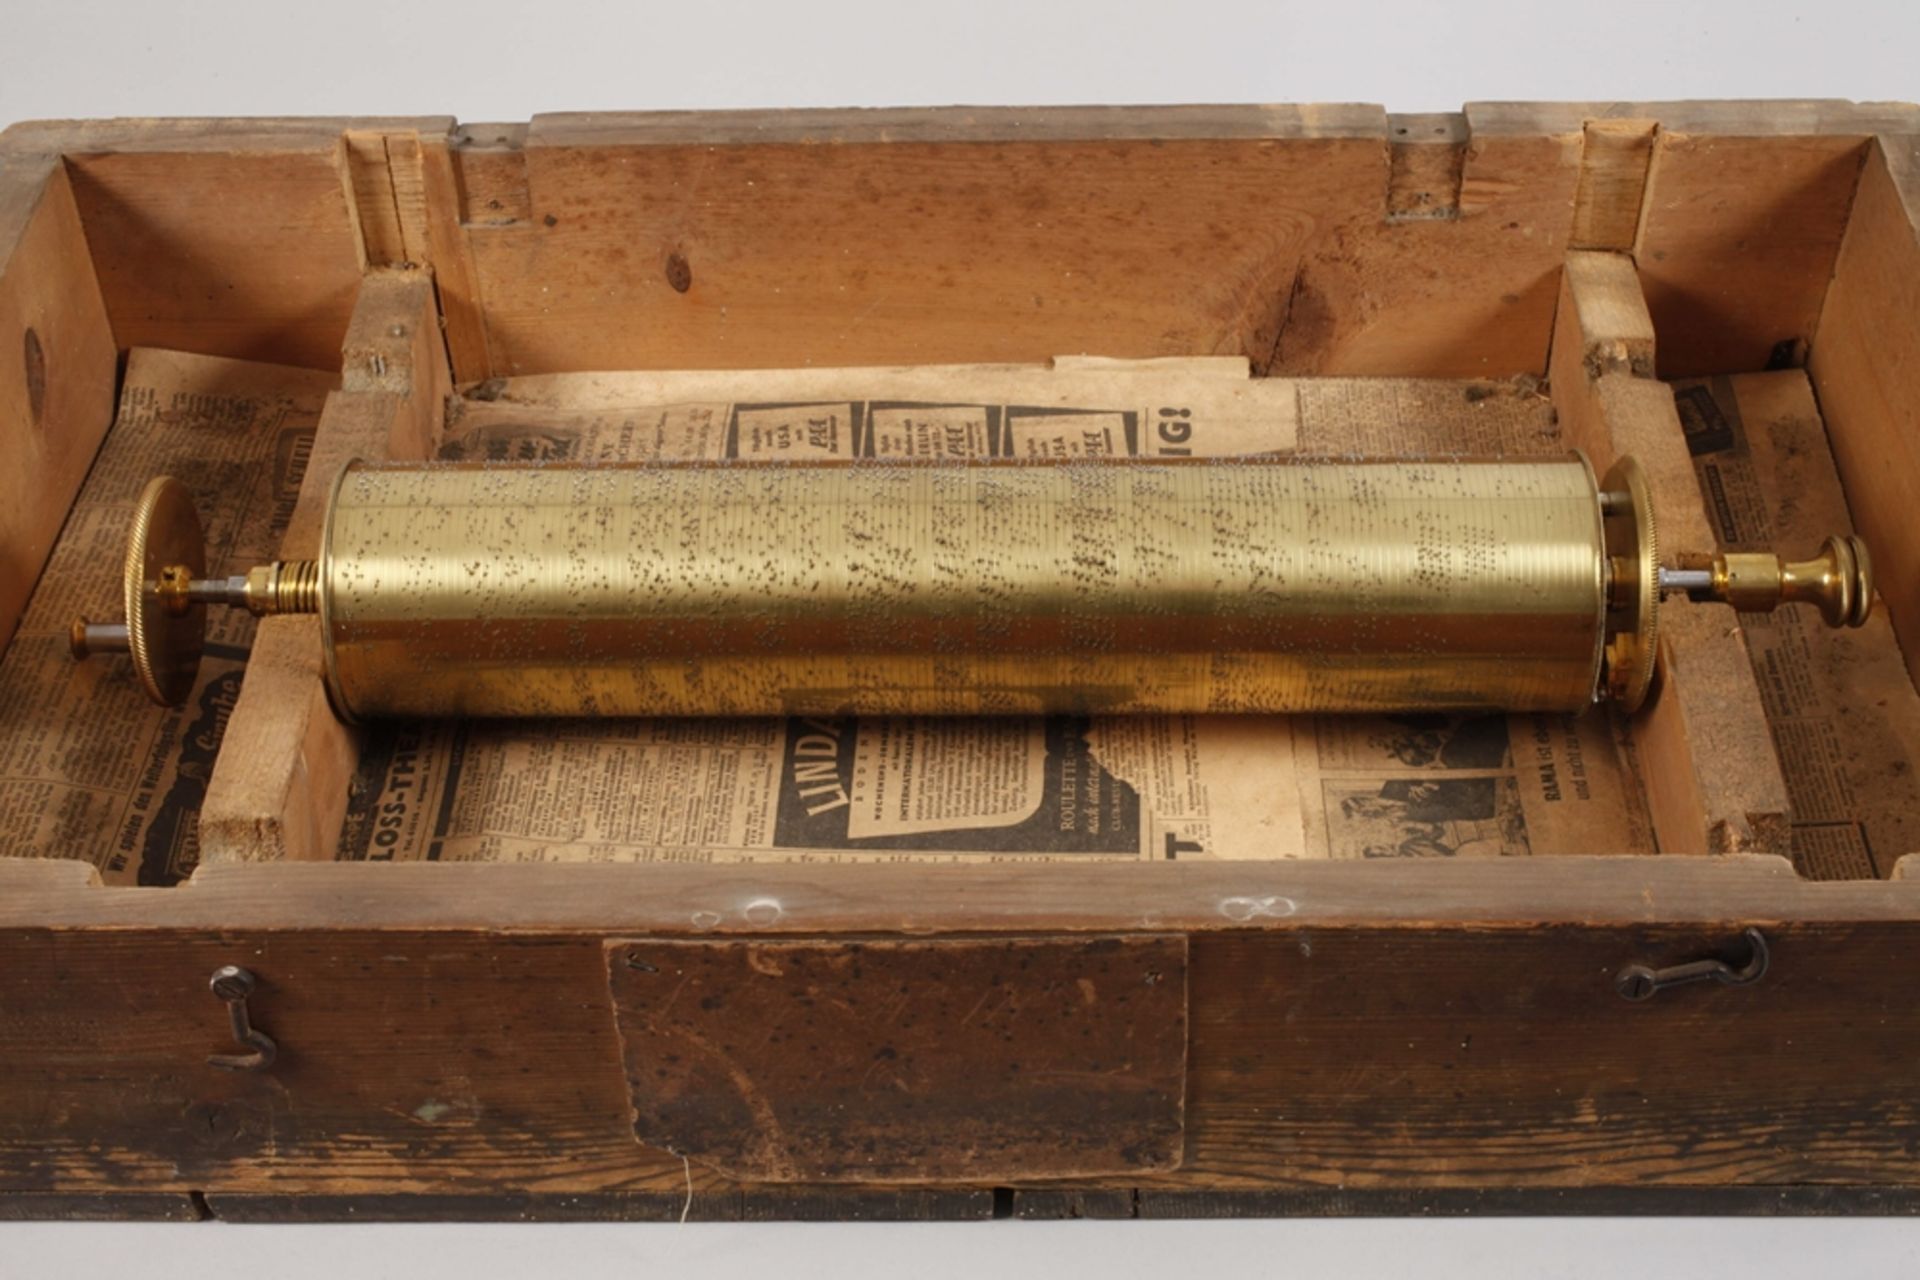 Oversized roller music box B. A. Bremond  - Image 7 of 8